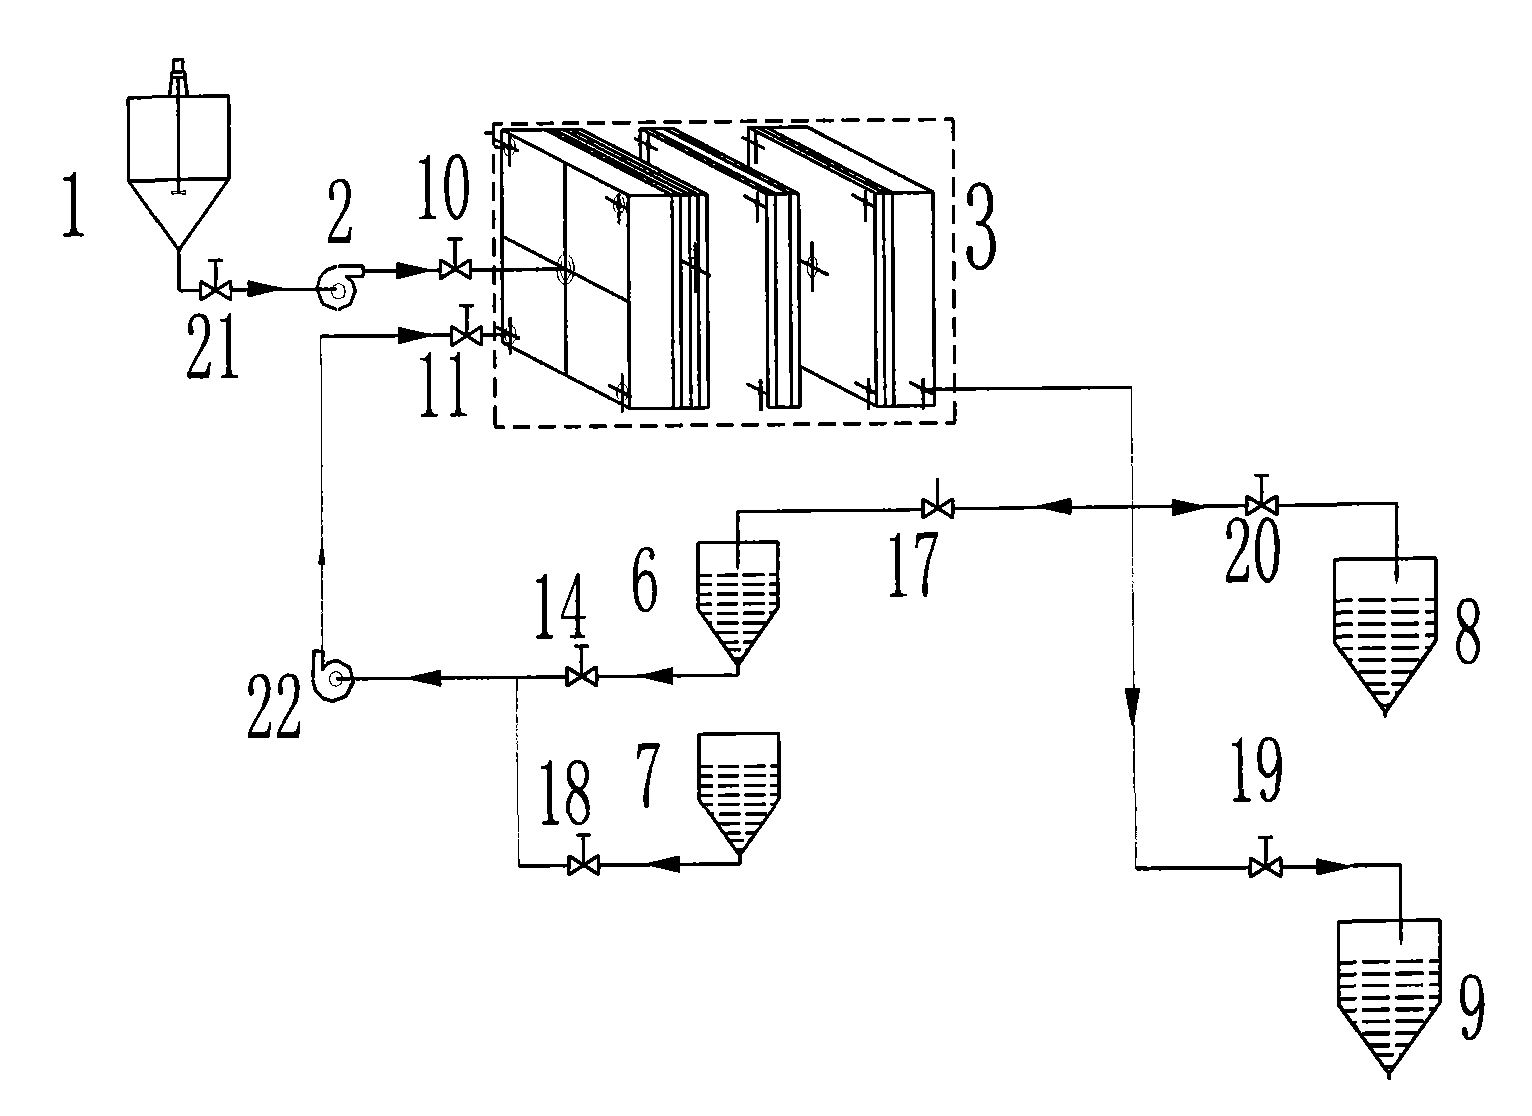 Multisection acid leaching, multistage countercurrent washing and filter pressing integrated system and method